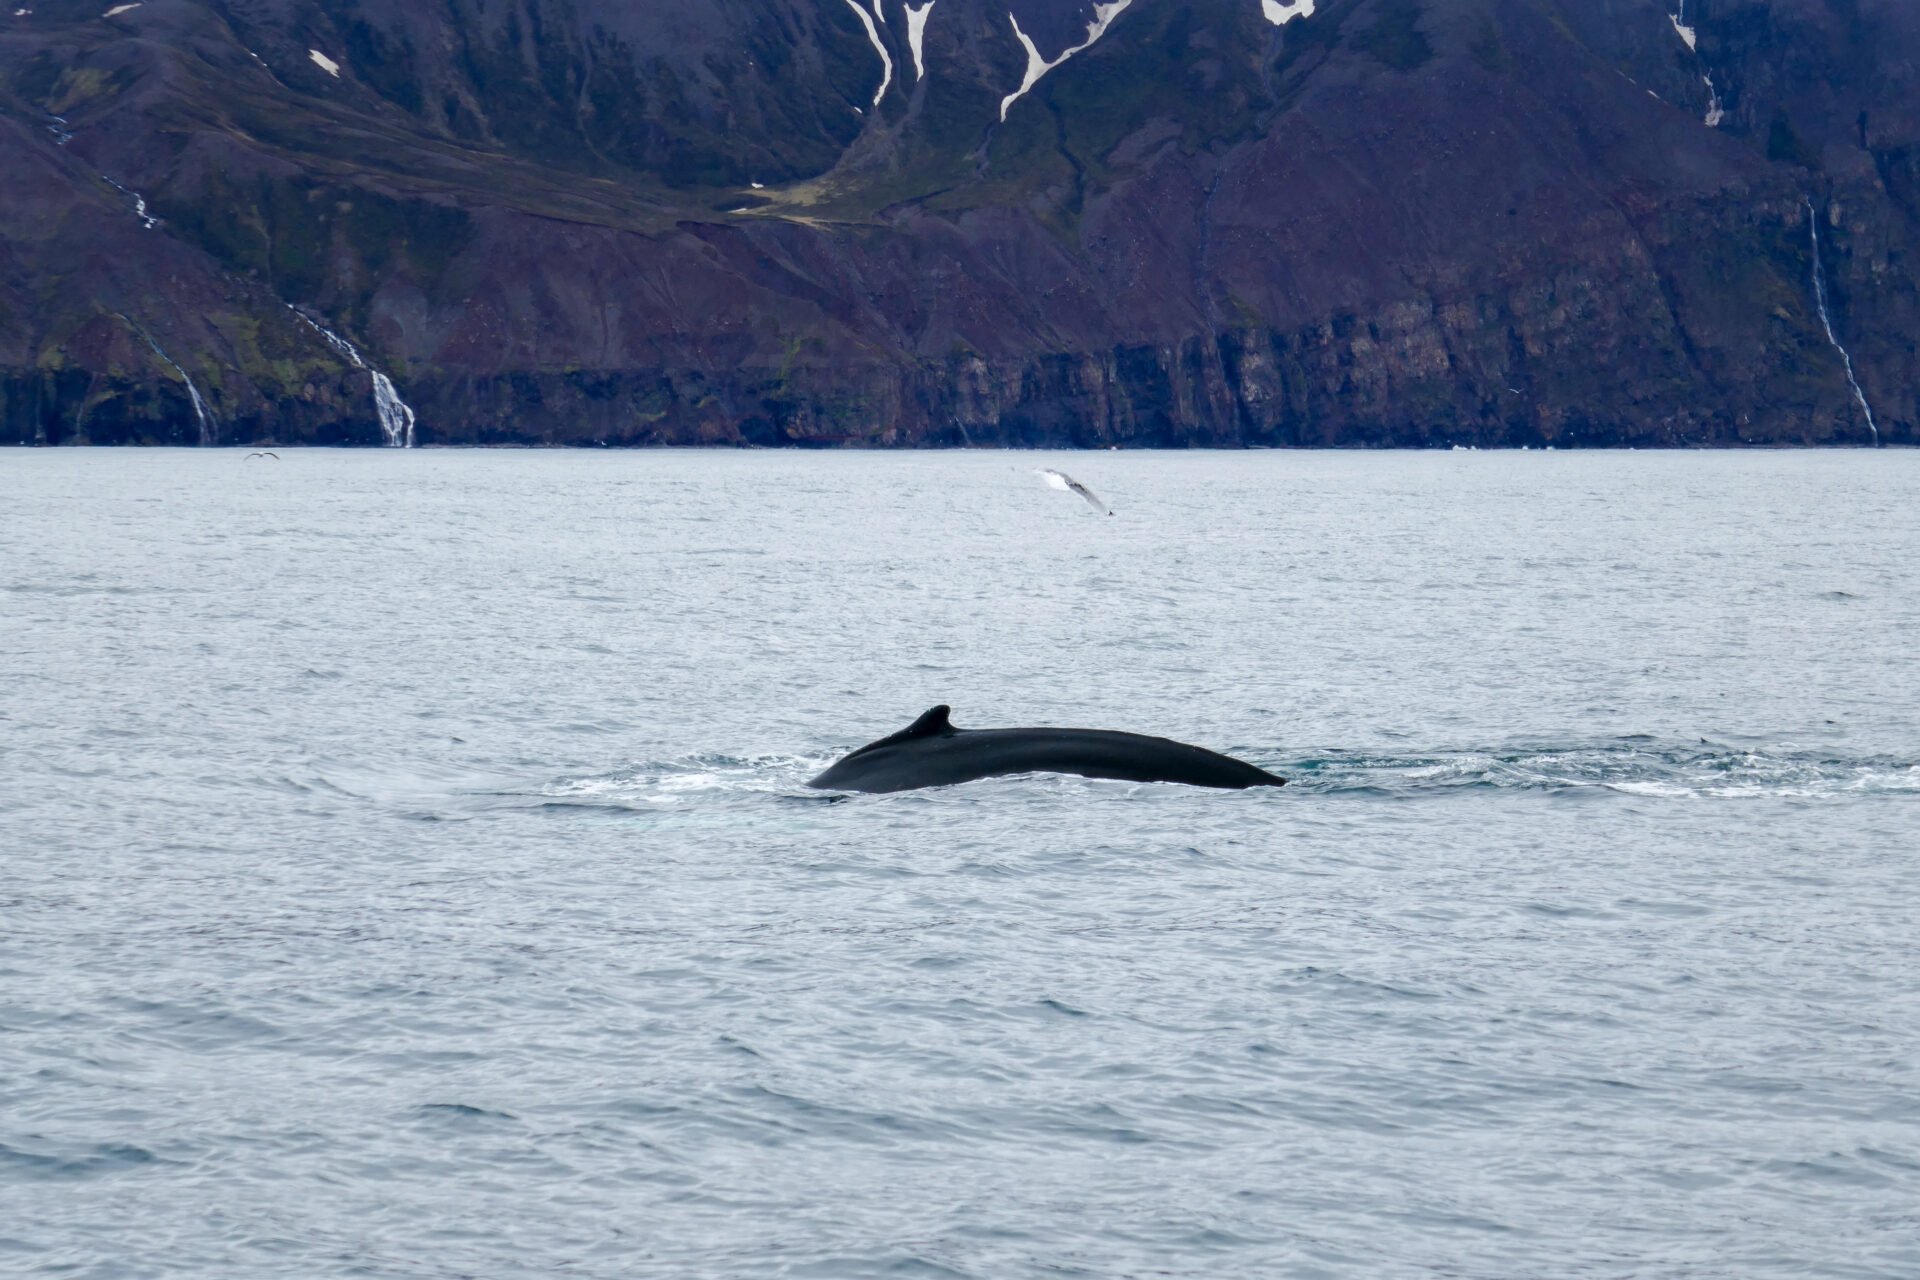 Husavik has the best whale watching in Iceland